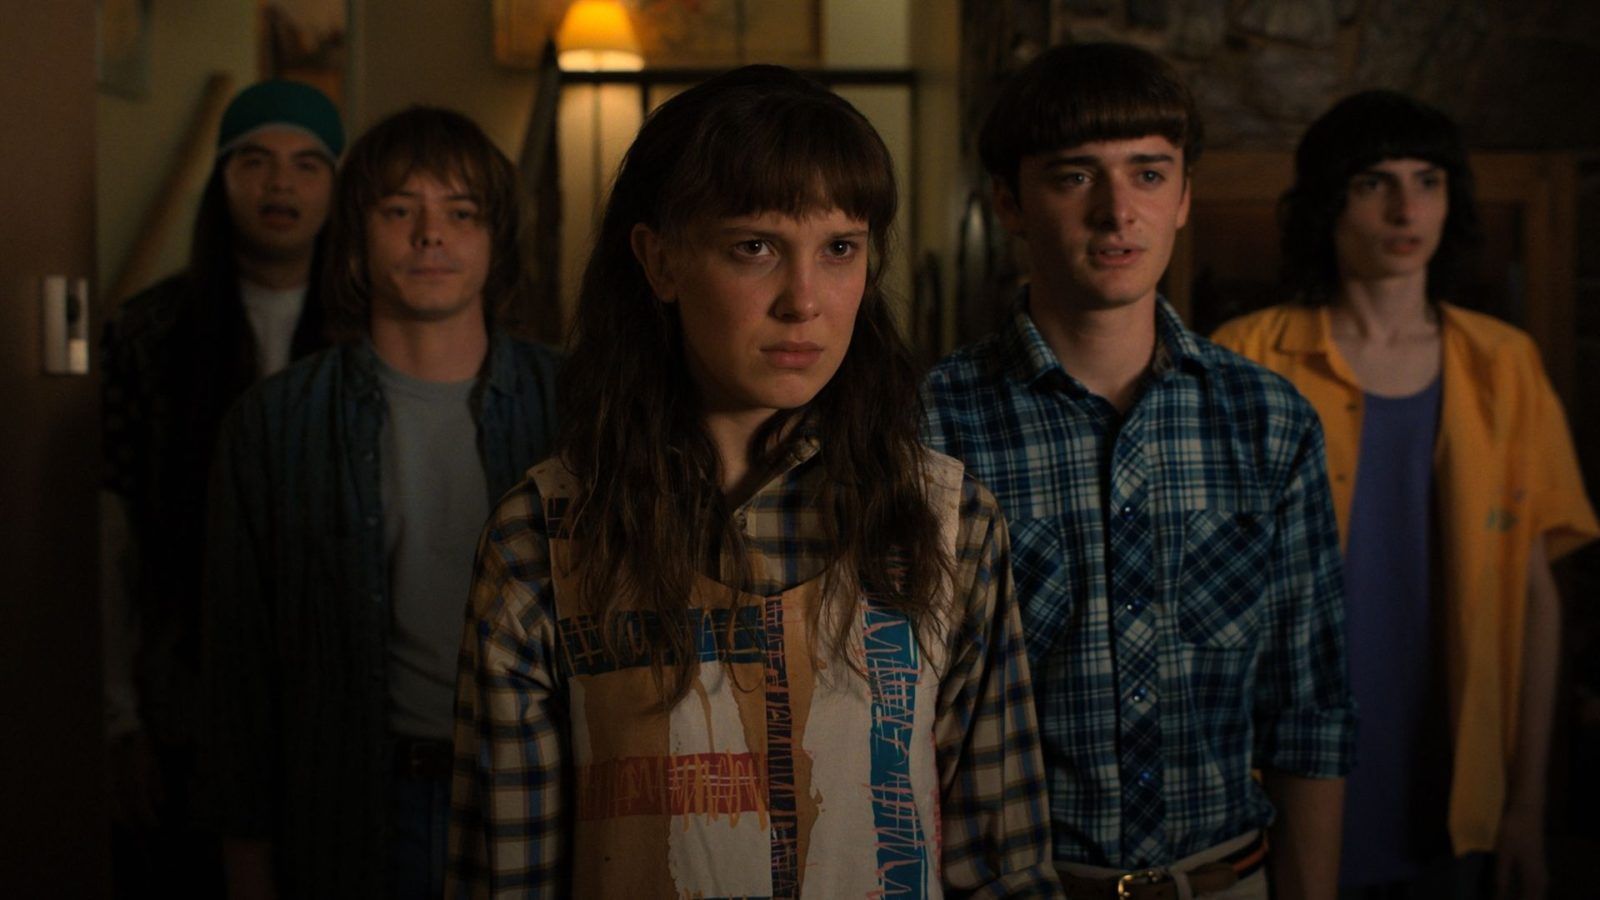 ‘Stranger Things’ season 5: Release date, plot, and more